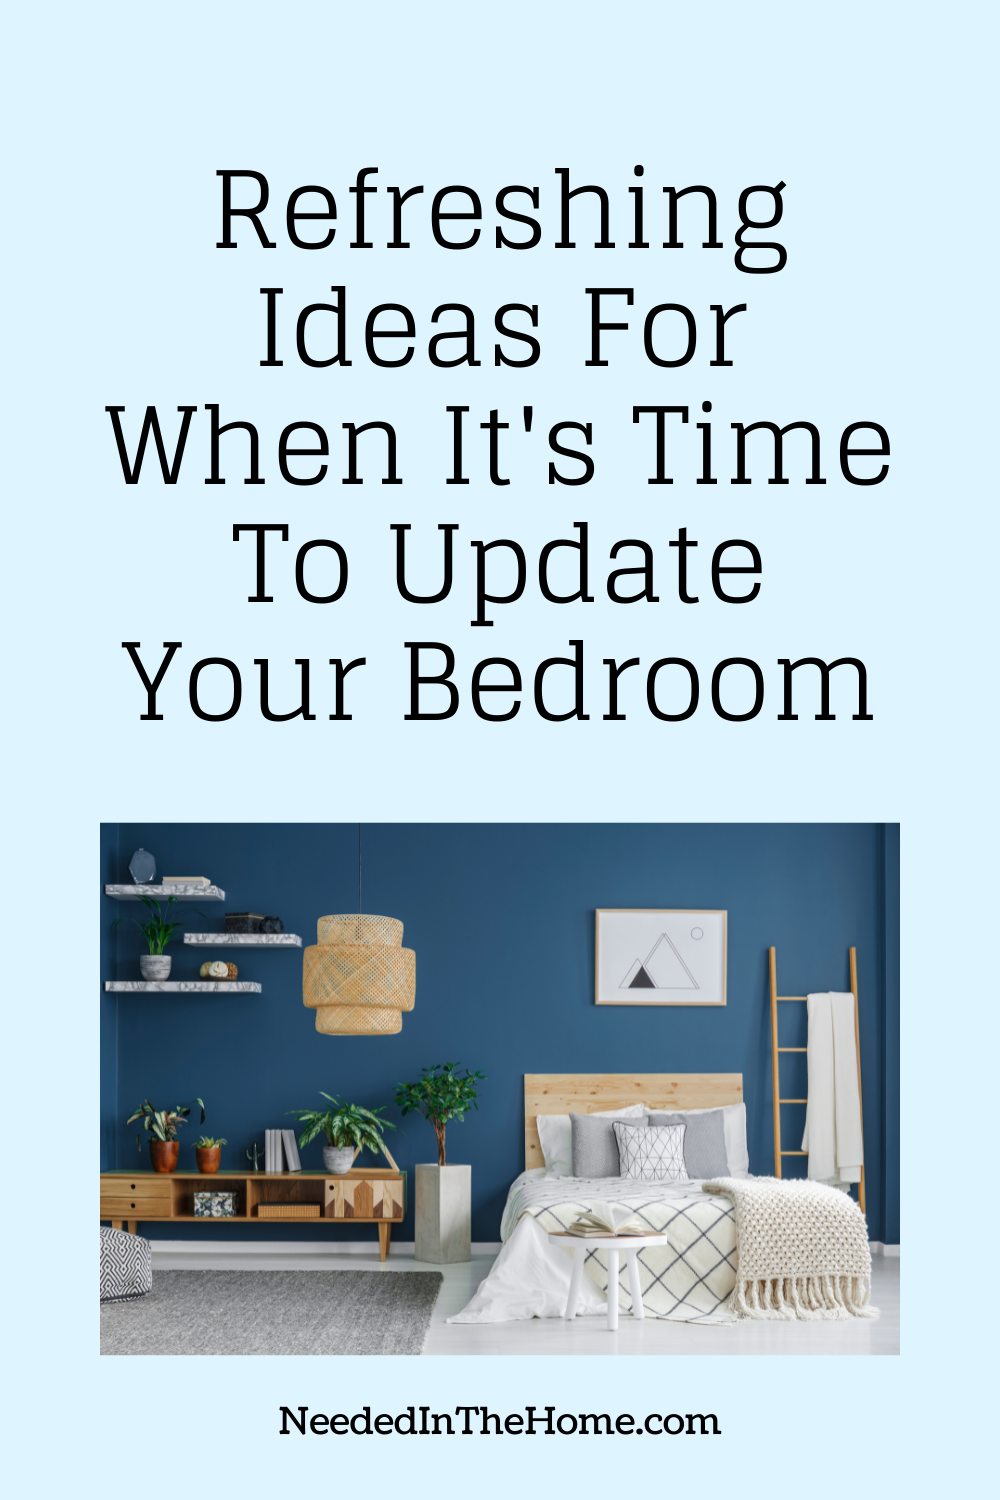 pinterest-pin-description refreshing ideas for when it's time to update your bedroom bed blankets pillows rug lighting decor neededinthehome